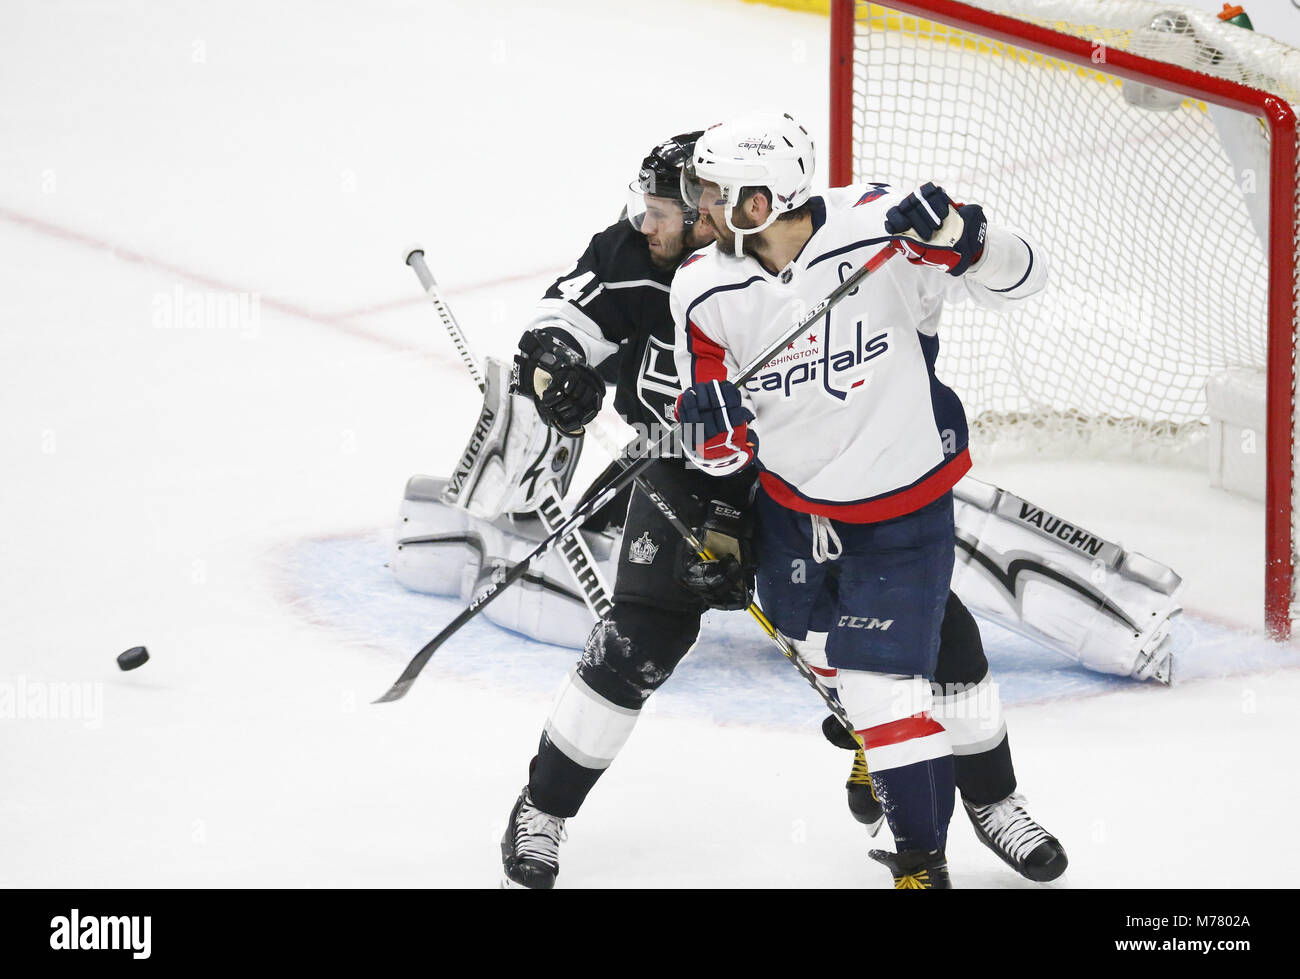 Los Angeles, California, USA. 8th Mar, 2018. Los Angeles Kings' defenseman Derek Forbort (24) vies with Washington Capitals' forward Alex Ovechkin (8) during a 2017-2018 NHL hockey game in Los Angeles, on March 8, 2018. The Kings won 3-1. Credit: Ringo Chiu/ZUMA Wire/Alamy Live News Stock Photo